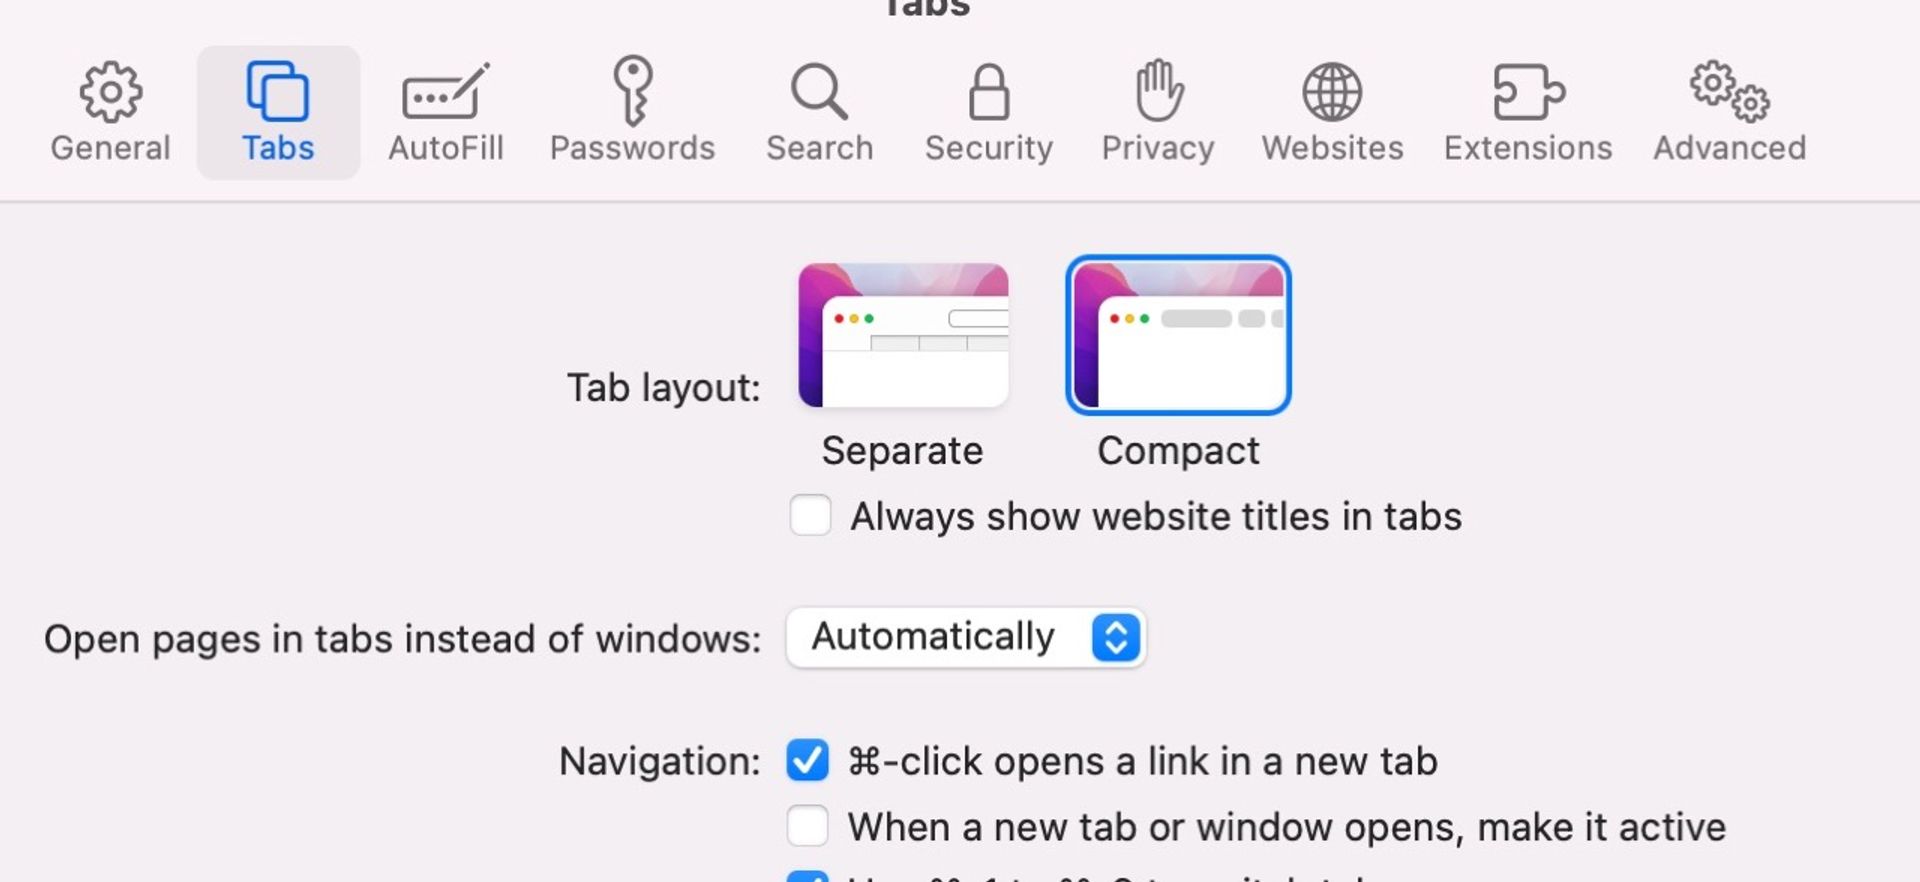 Safari 16 settings on macOS, going to Safari then 'Preferences', then 'Tabs'. This reveals settings called 'Tab Layout' with two options: Separate and Compact. When Compact is selected the theme-colour can be seen.